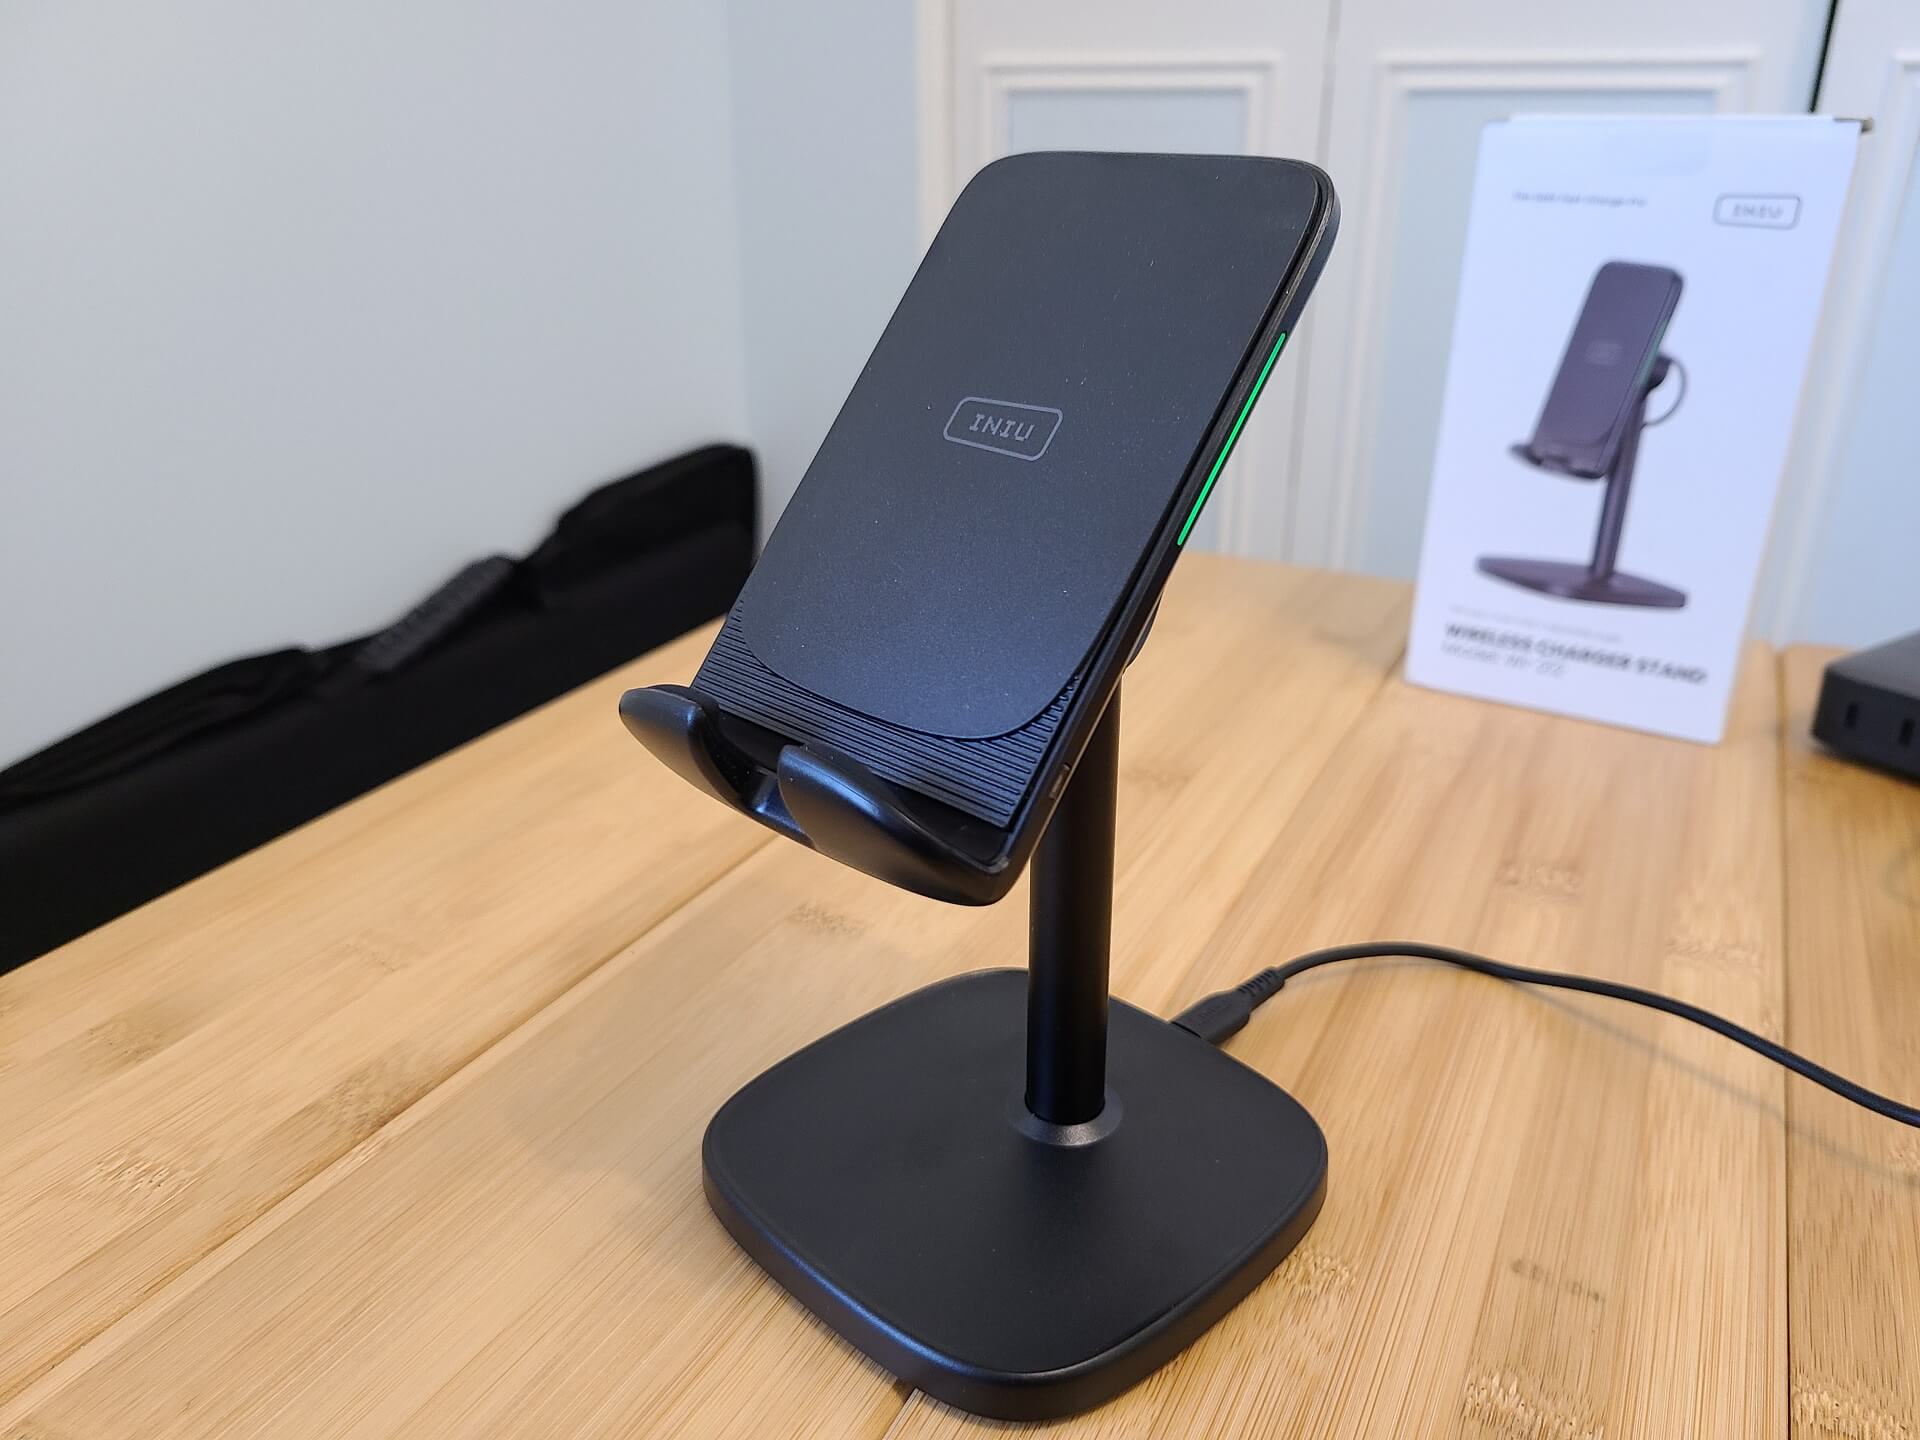 INIU 15W Adjustable Fast Wireless Charging Stand Review